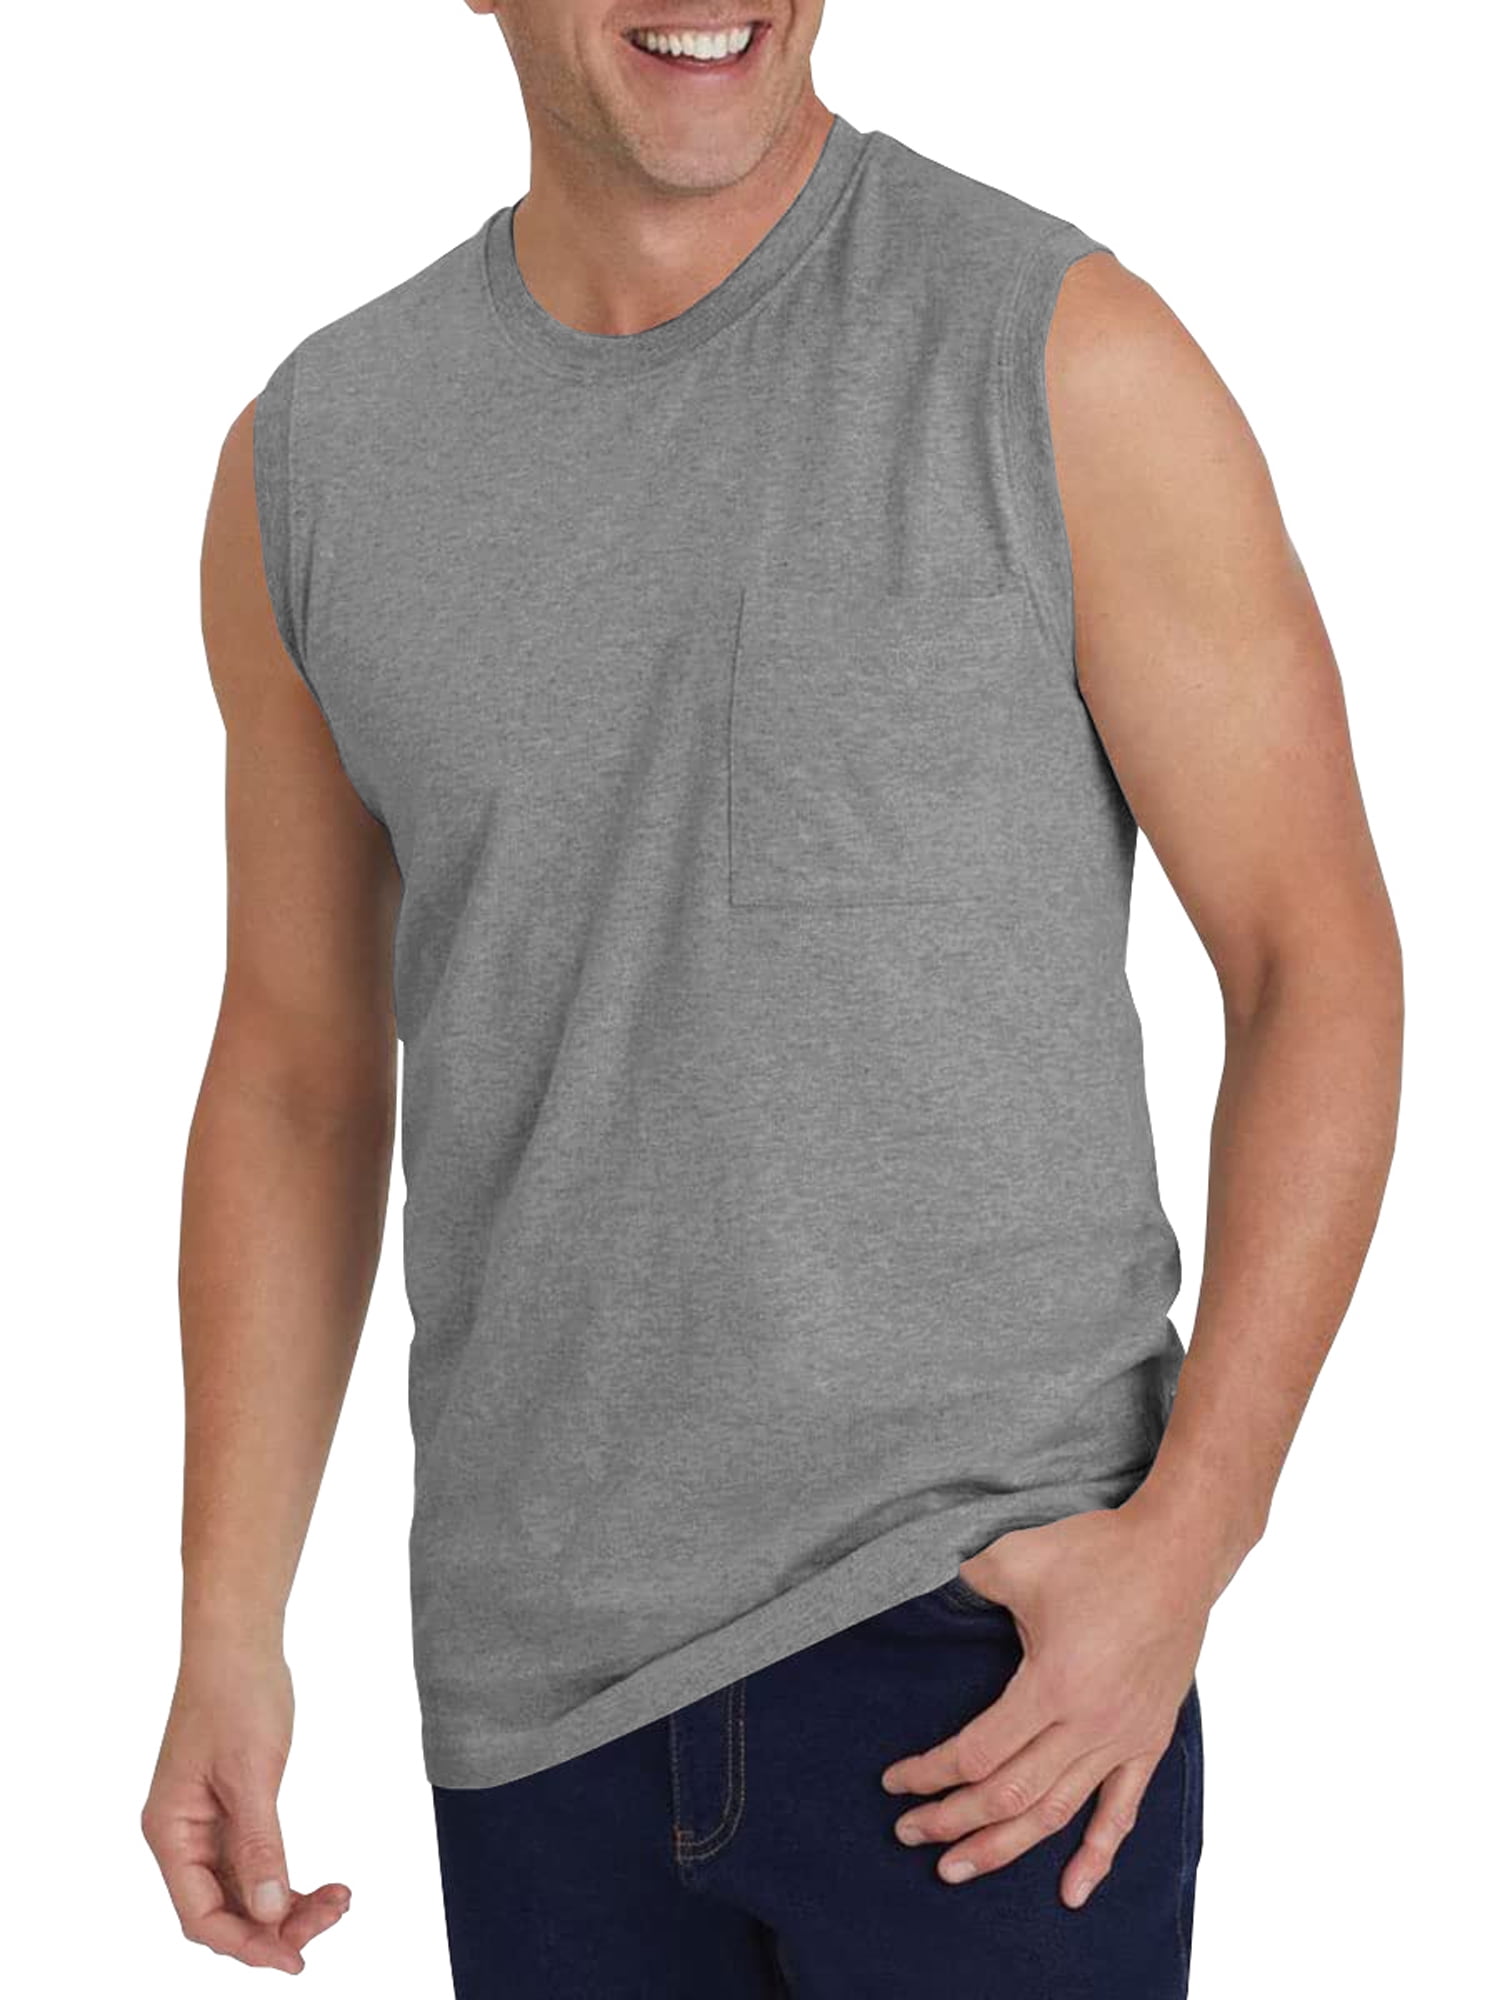 Remikst Men's Sleeveless Muscle Tank Top with Pocket Solid Crewneck Workout  Shirt,M-3XL